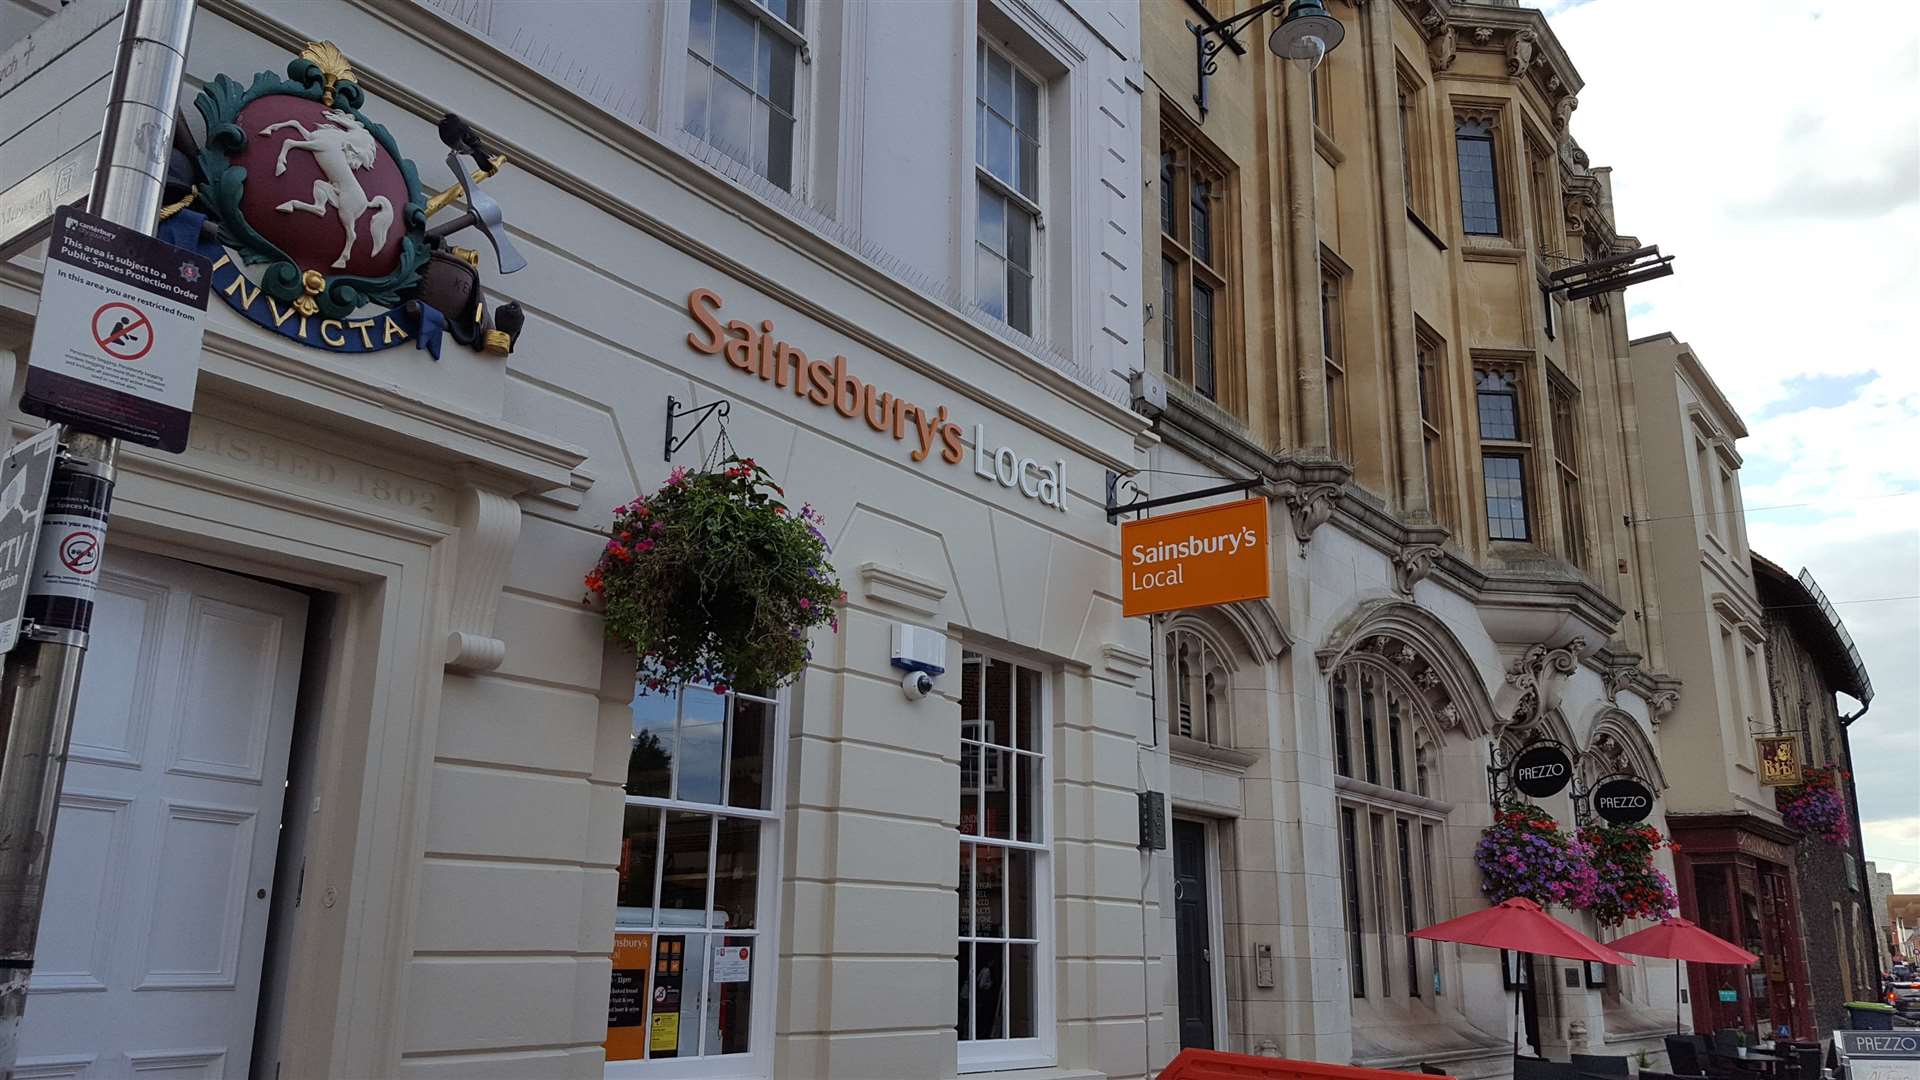 The new Sainsbury's opened earlier this month